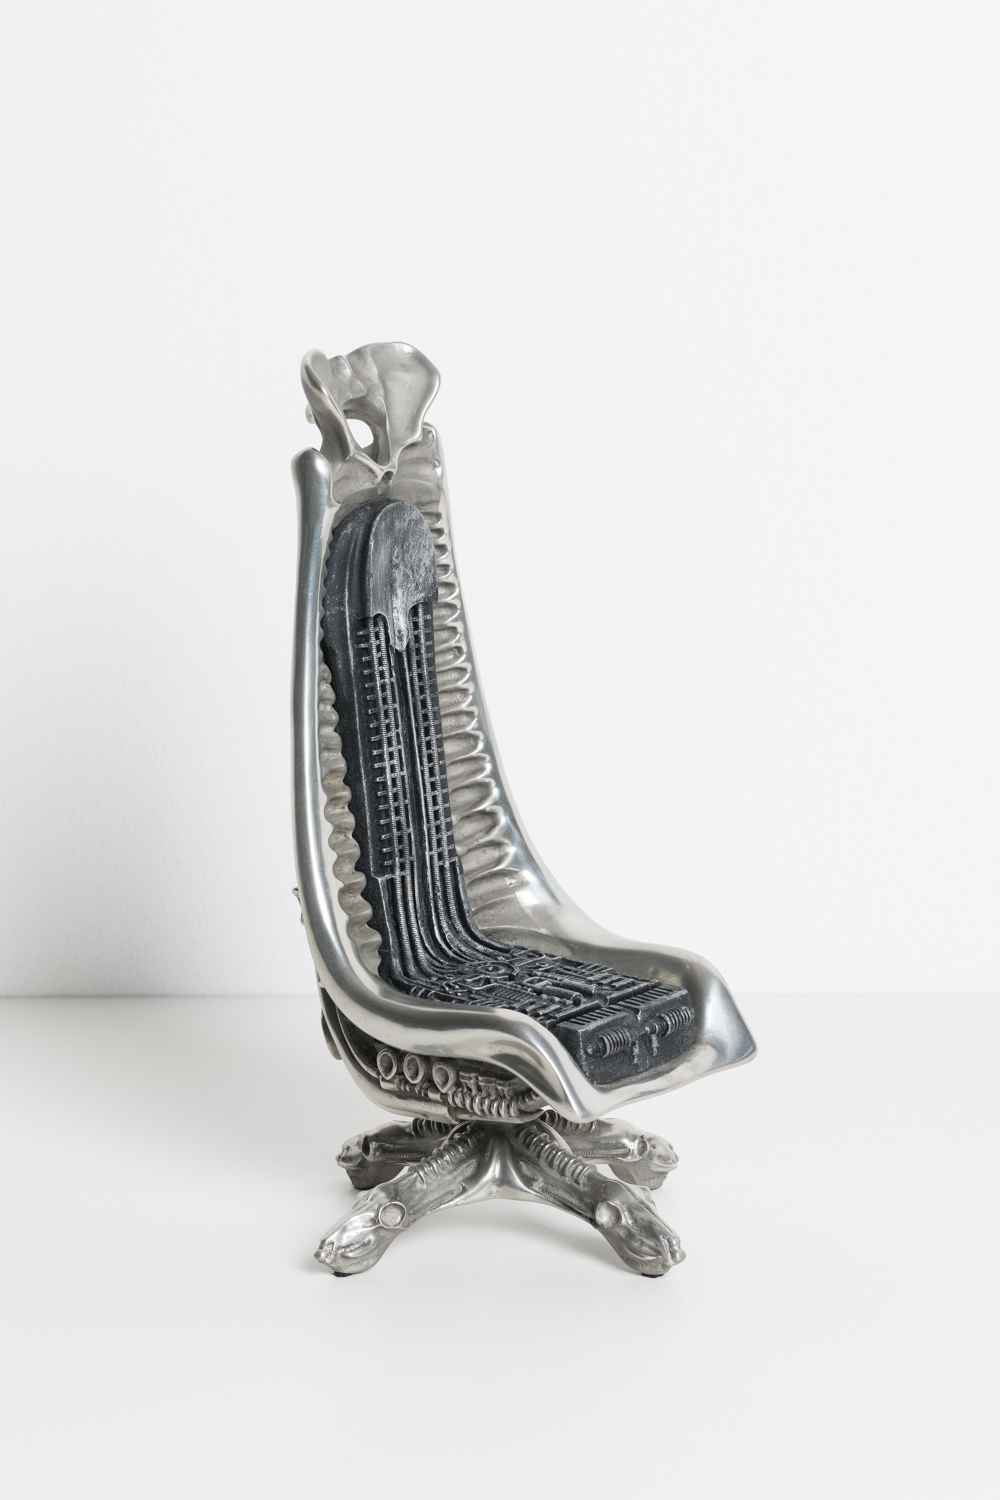 Harkonnen Chair by H. R. Giger, 1981